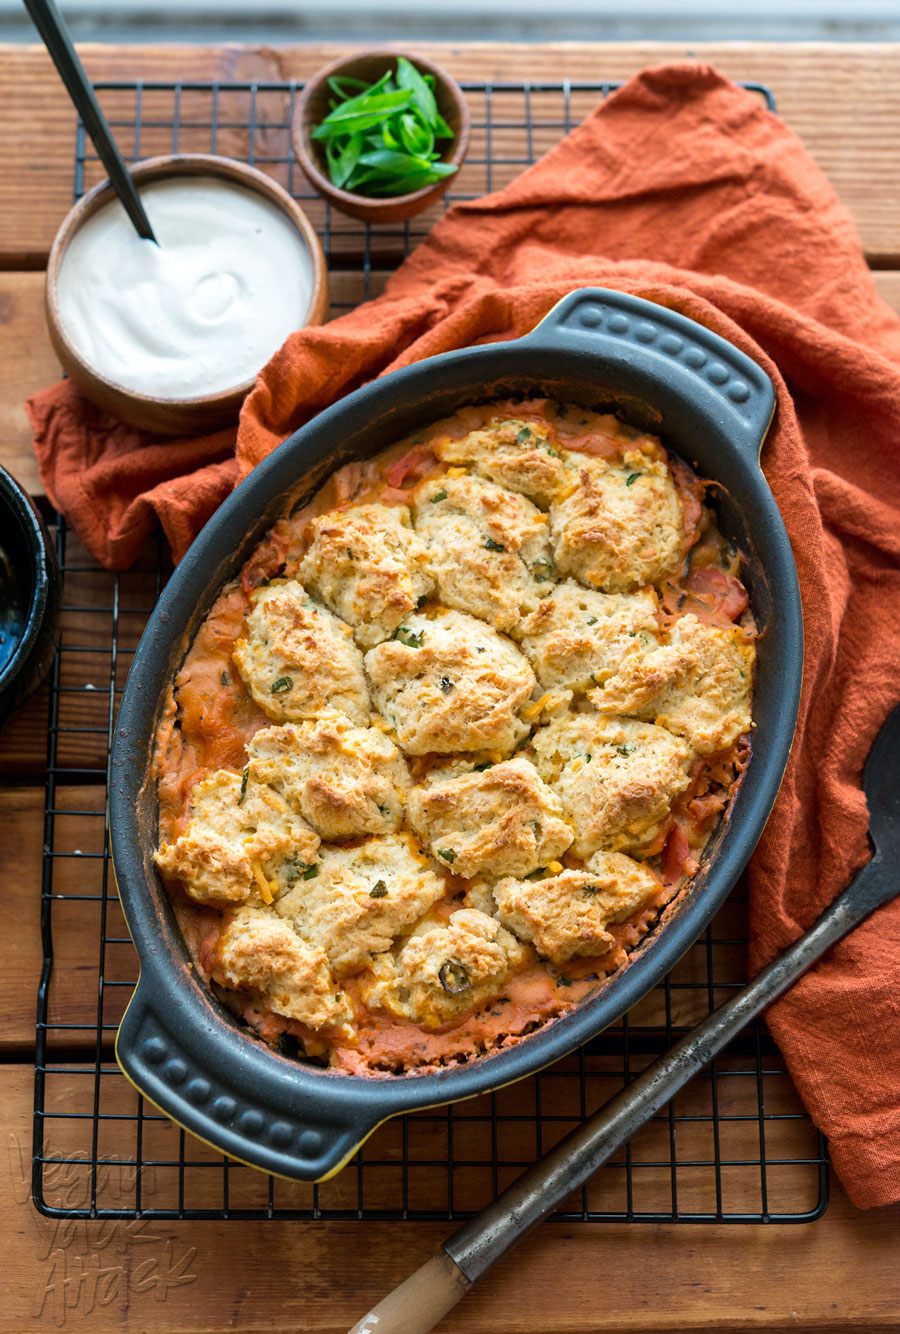 Savory Tomato Cobbler with Vegan Cheddar Chive Biscuit topping! Delicious, hearty and perfect for a weeknight dinner. #nutfree #dairyfree #sponsored #DoPlants 